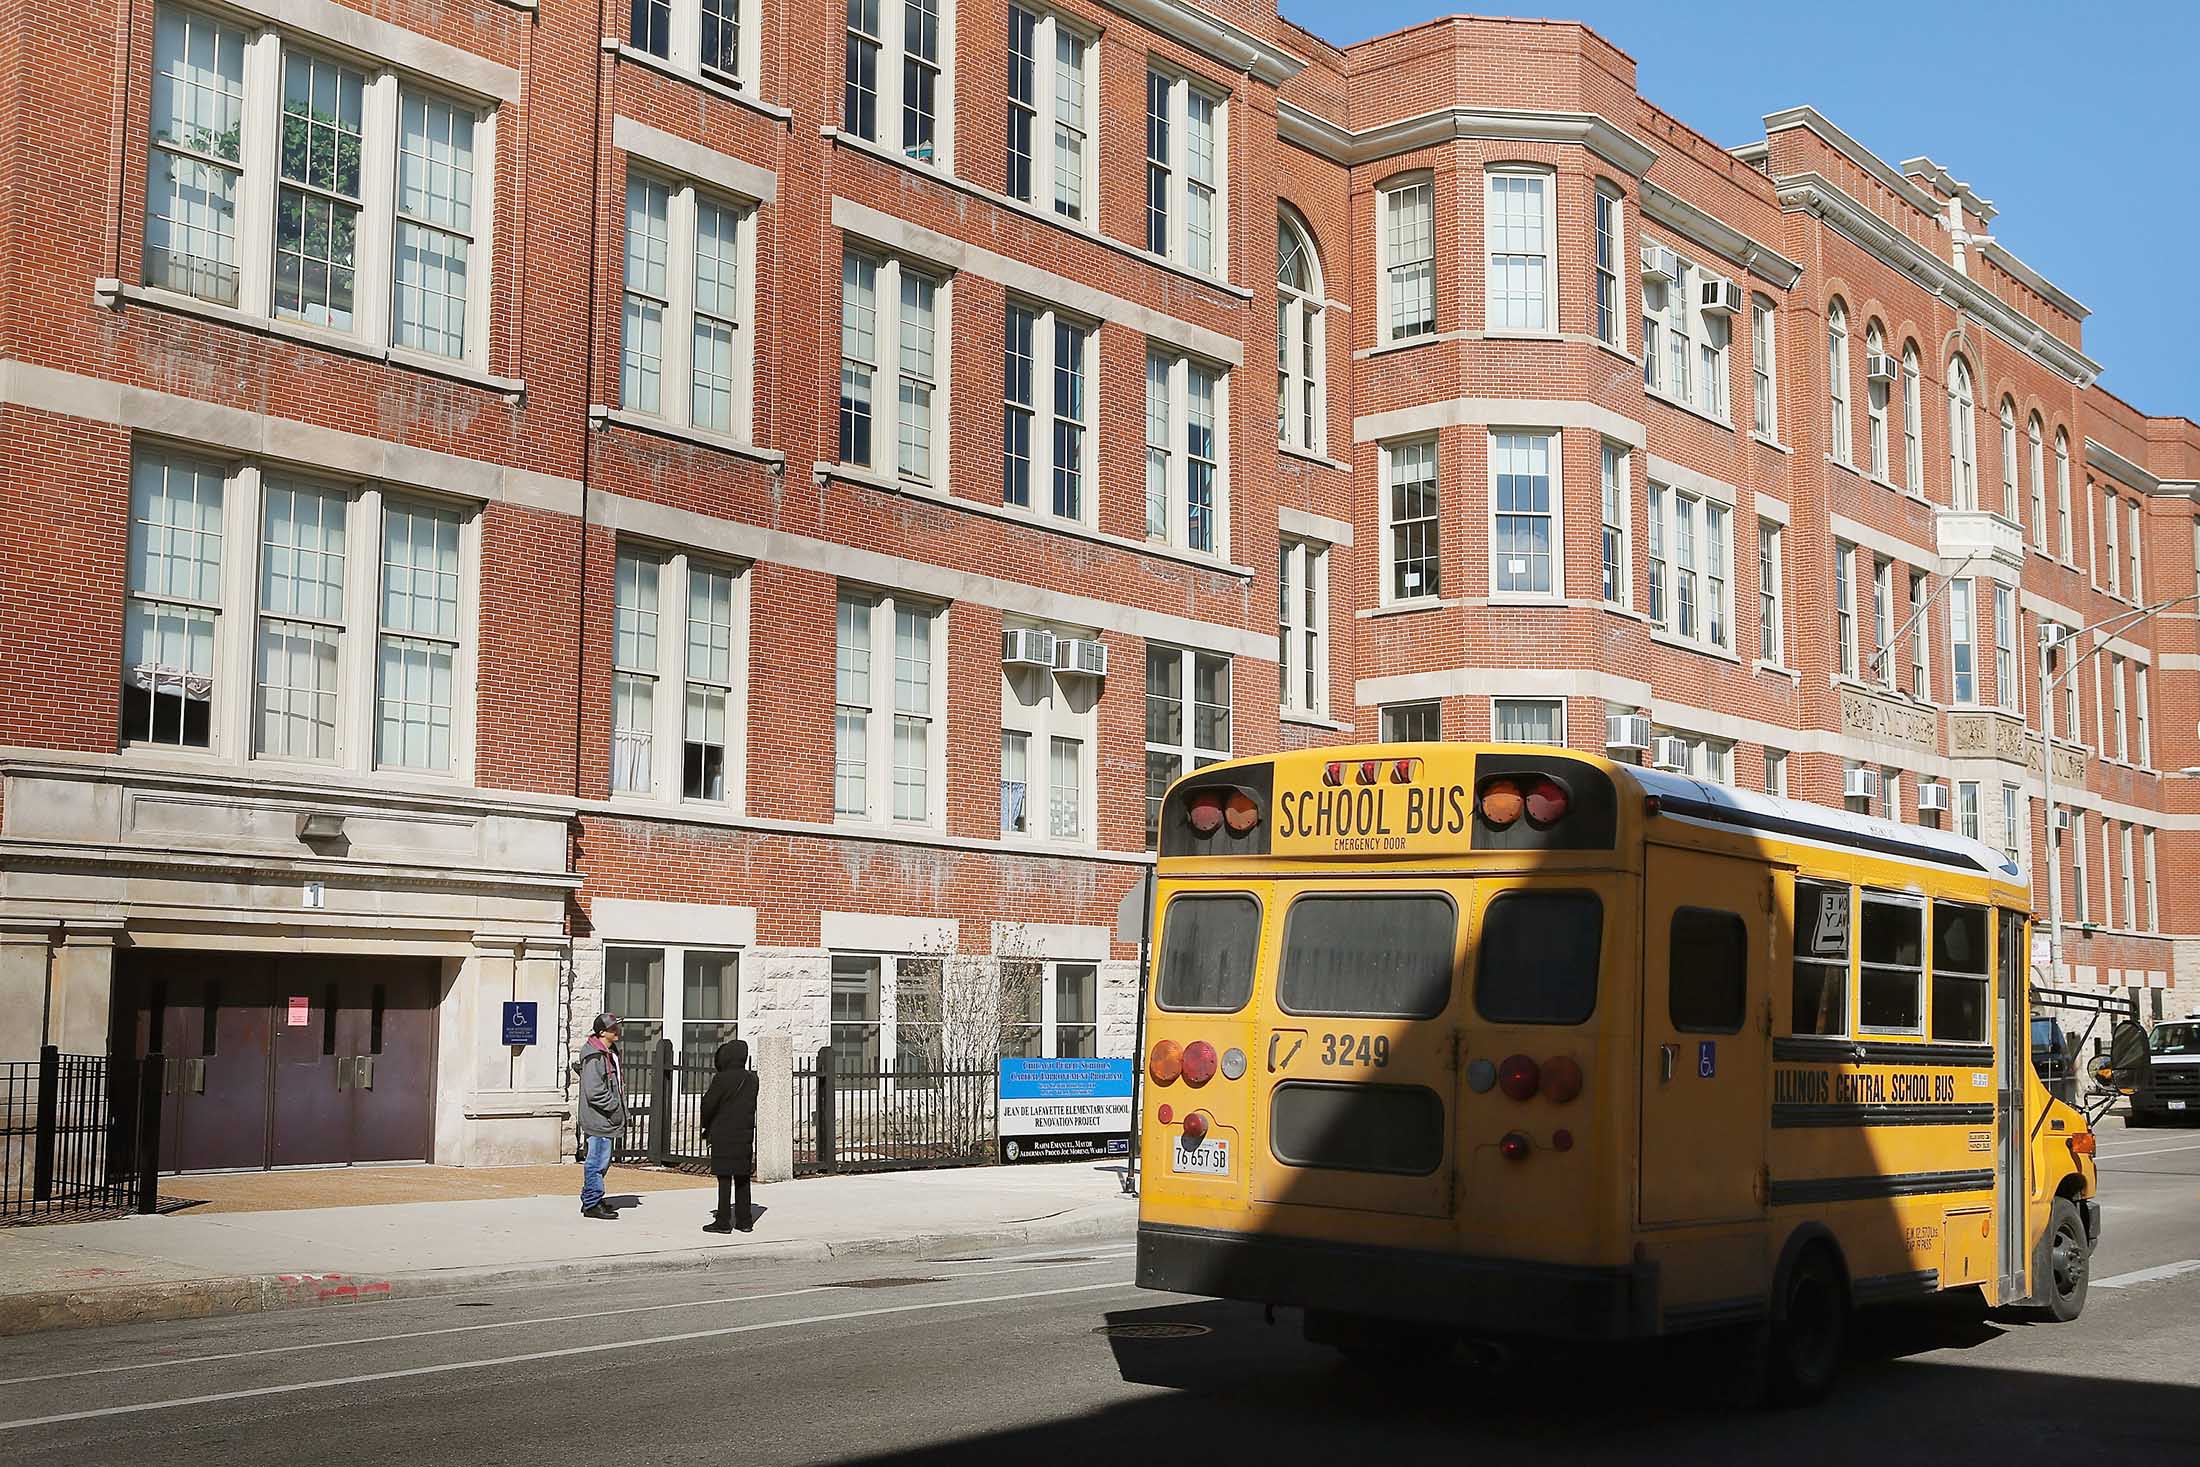 A school bus in Chicago on March 21, 2013.
